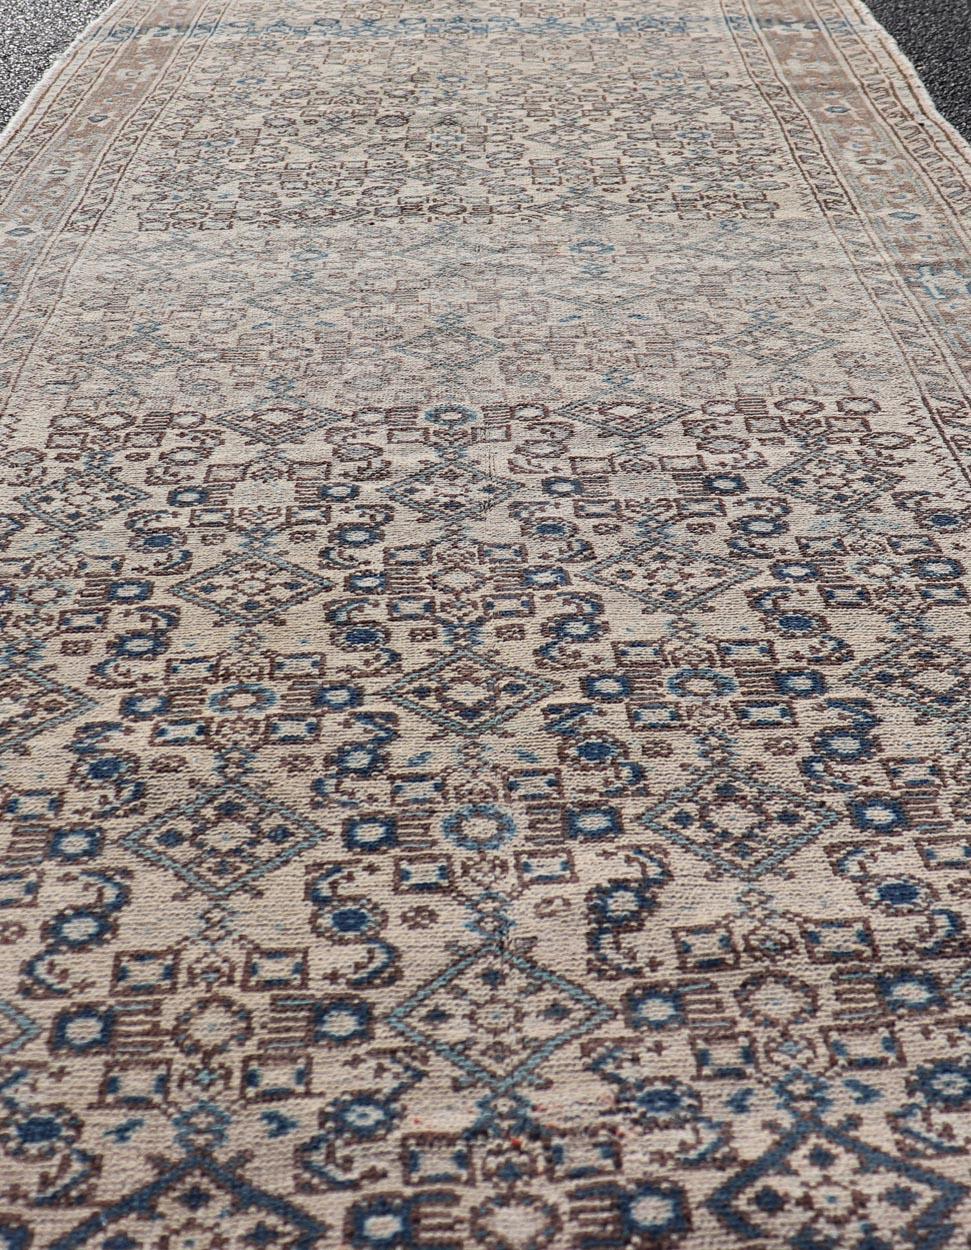 Vintage Persian Hamadan Runner in Cool Tones of Light Blue, Ivory, and L. Brown. Country of Origin: Iran; Type: Hamedan; Design: Floral, Persian Floral, All-Over; Keivan Woven Arts: rug MSE-1944. 
Measures: 3'7 x 9'8
This vintage Persian runner